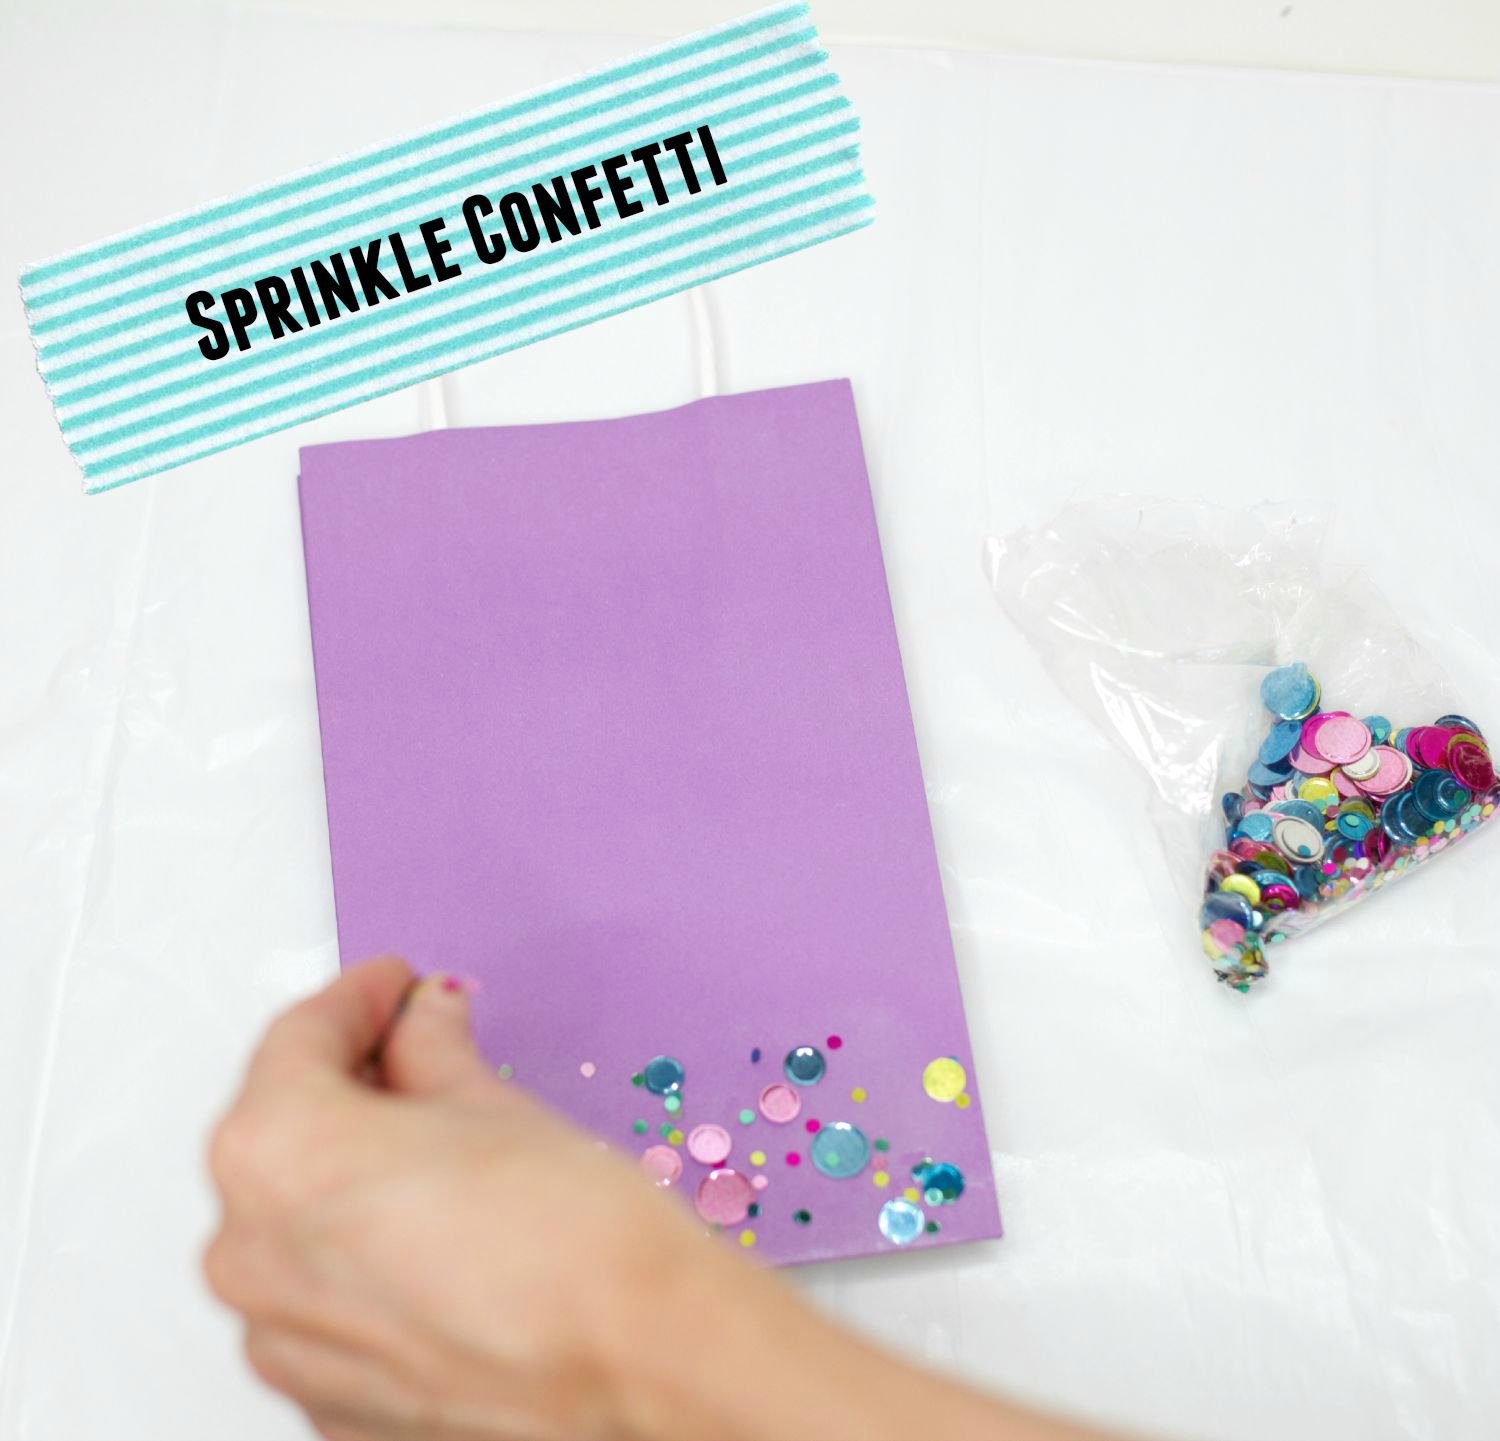 DIY Confetti Dipped Gift Bags | PartiesforPennies.com